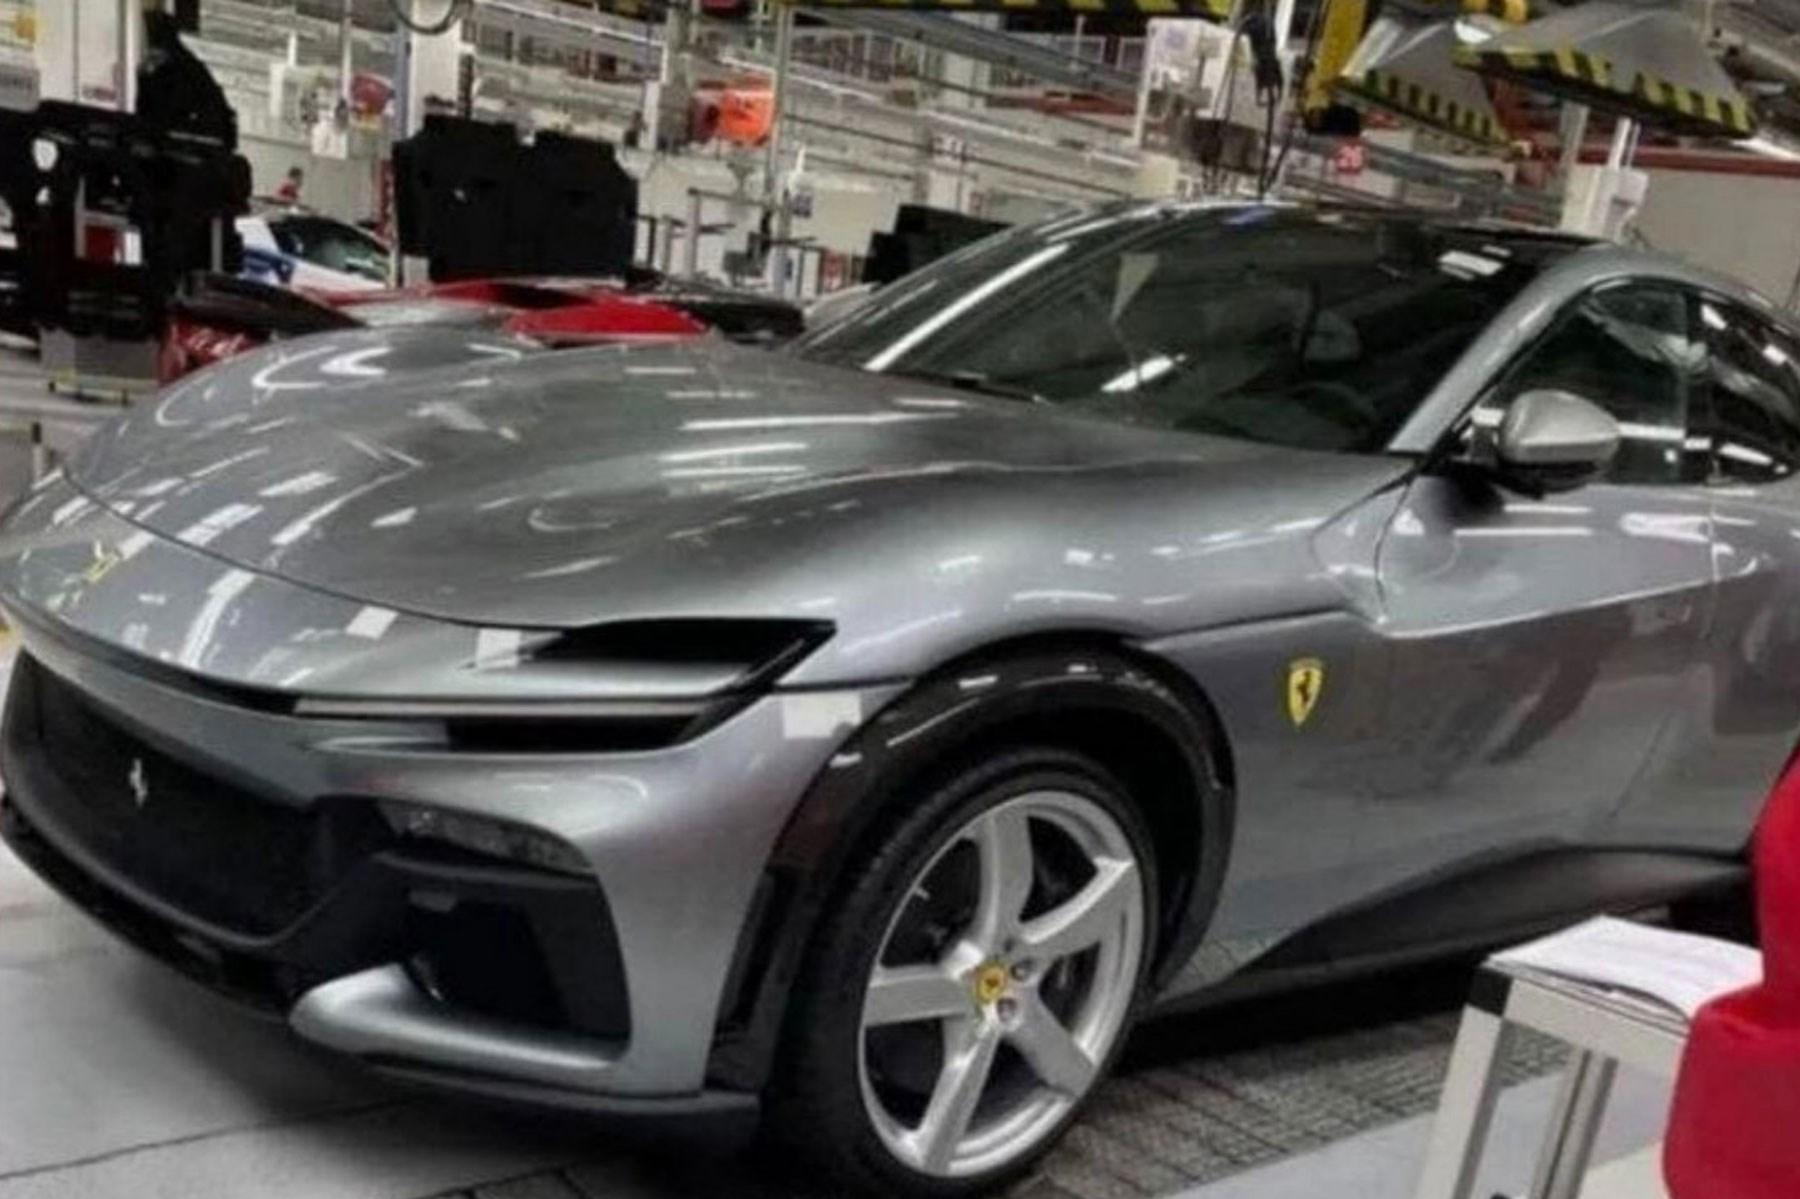 Ferrari Purosangue To Arrive In September With V12 Power And